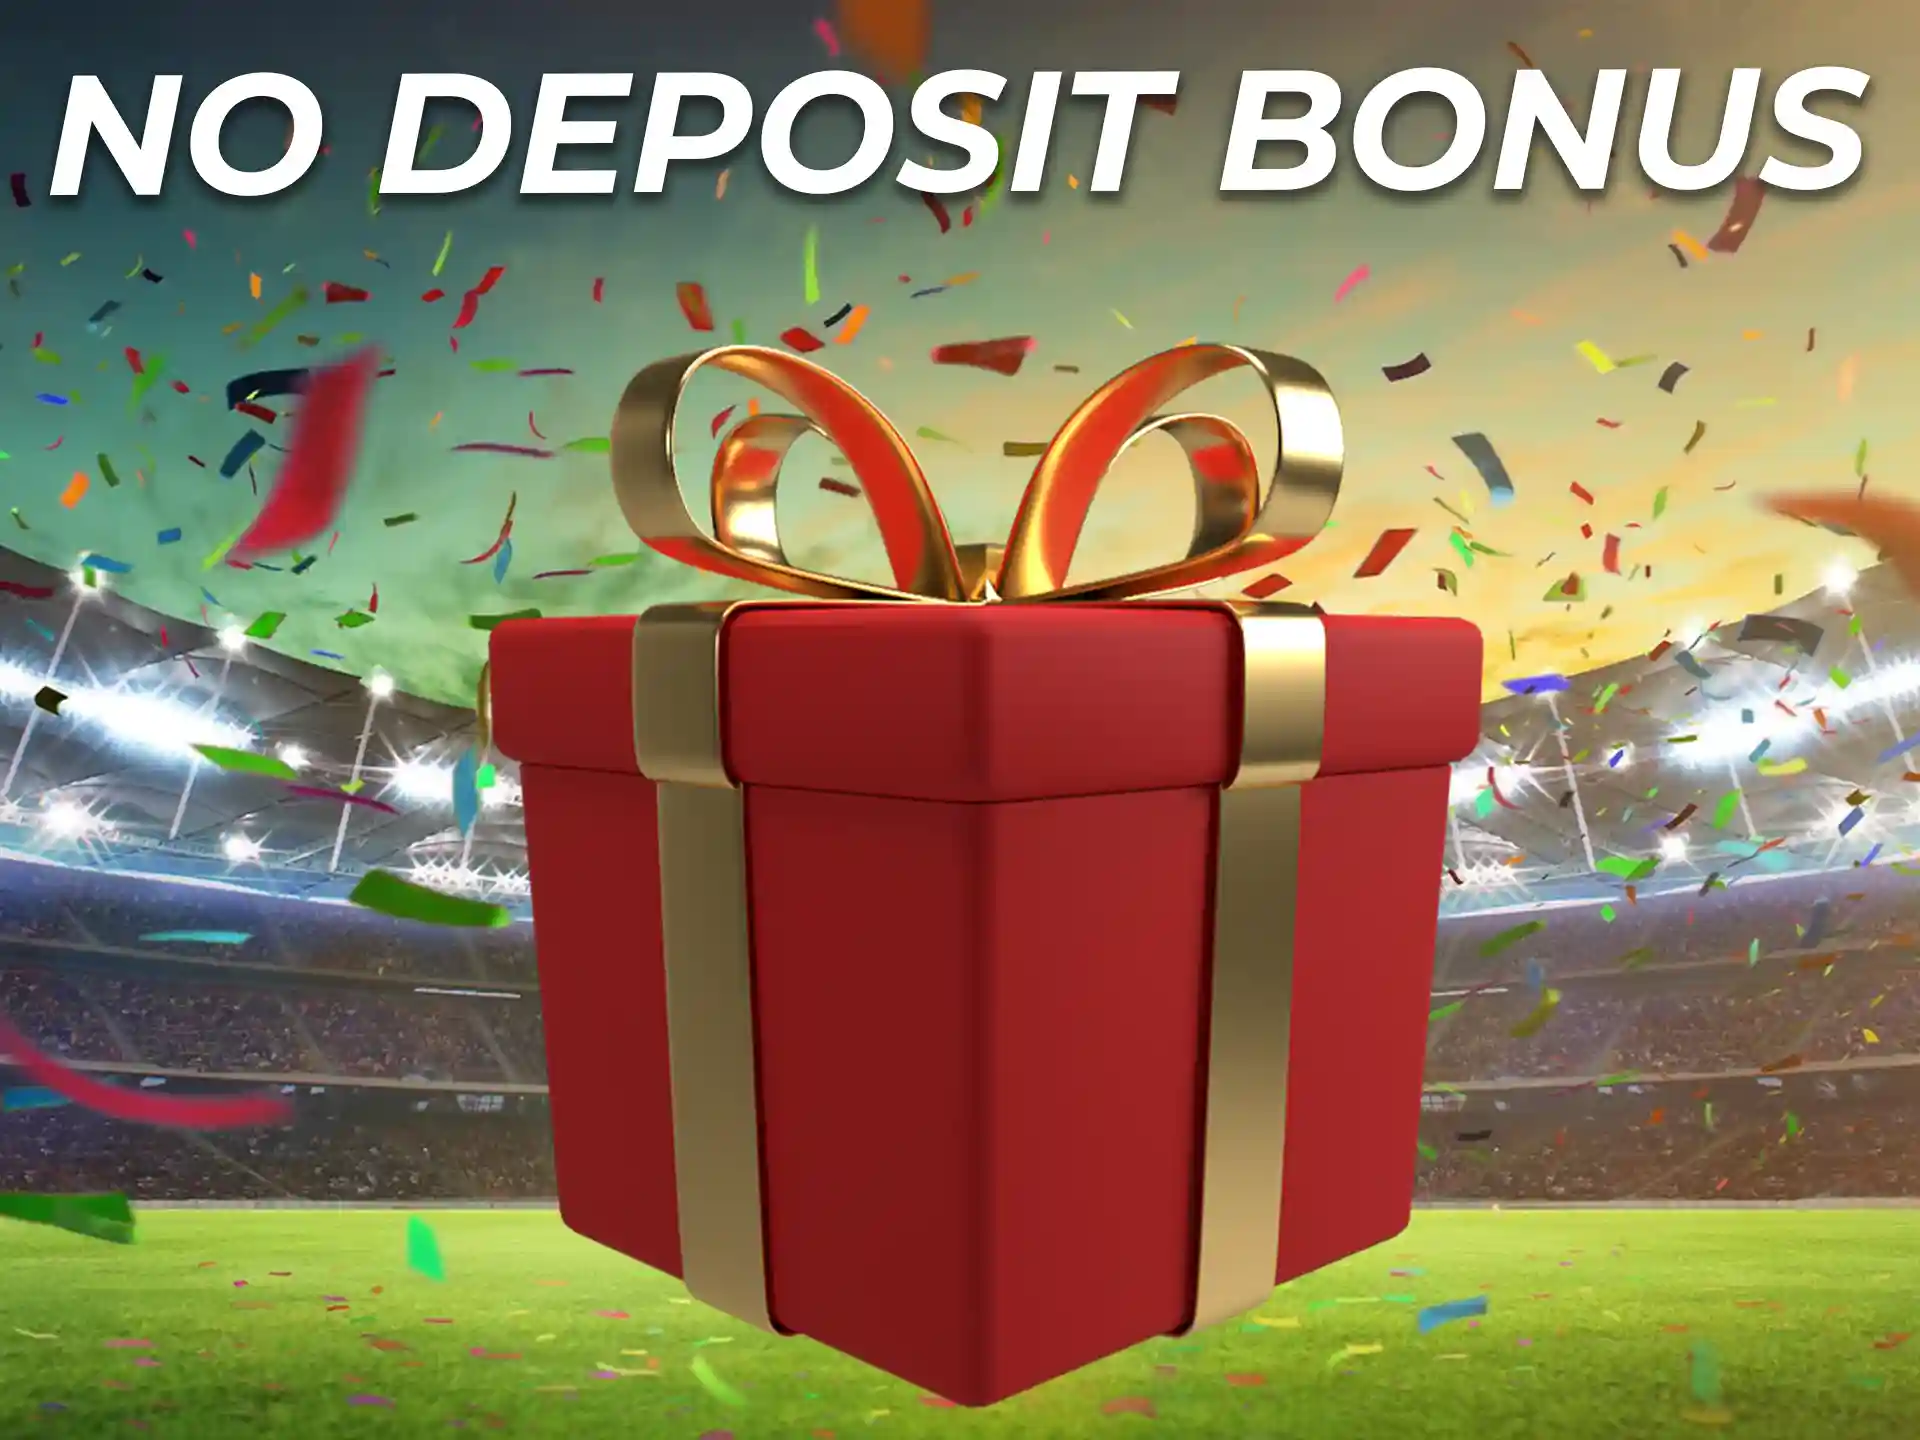 Players get free bonus funds or spins without making a deposit.